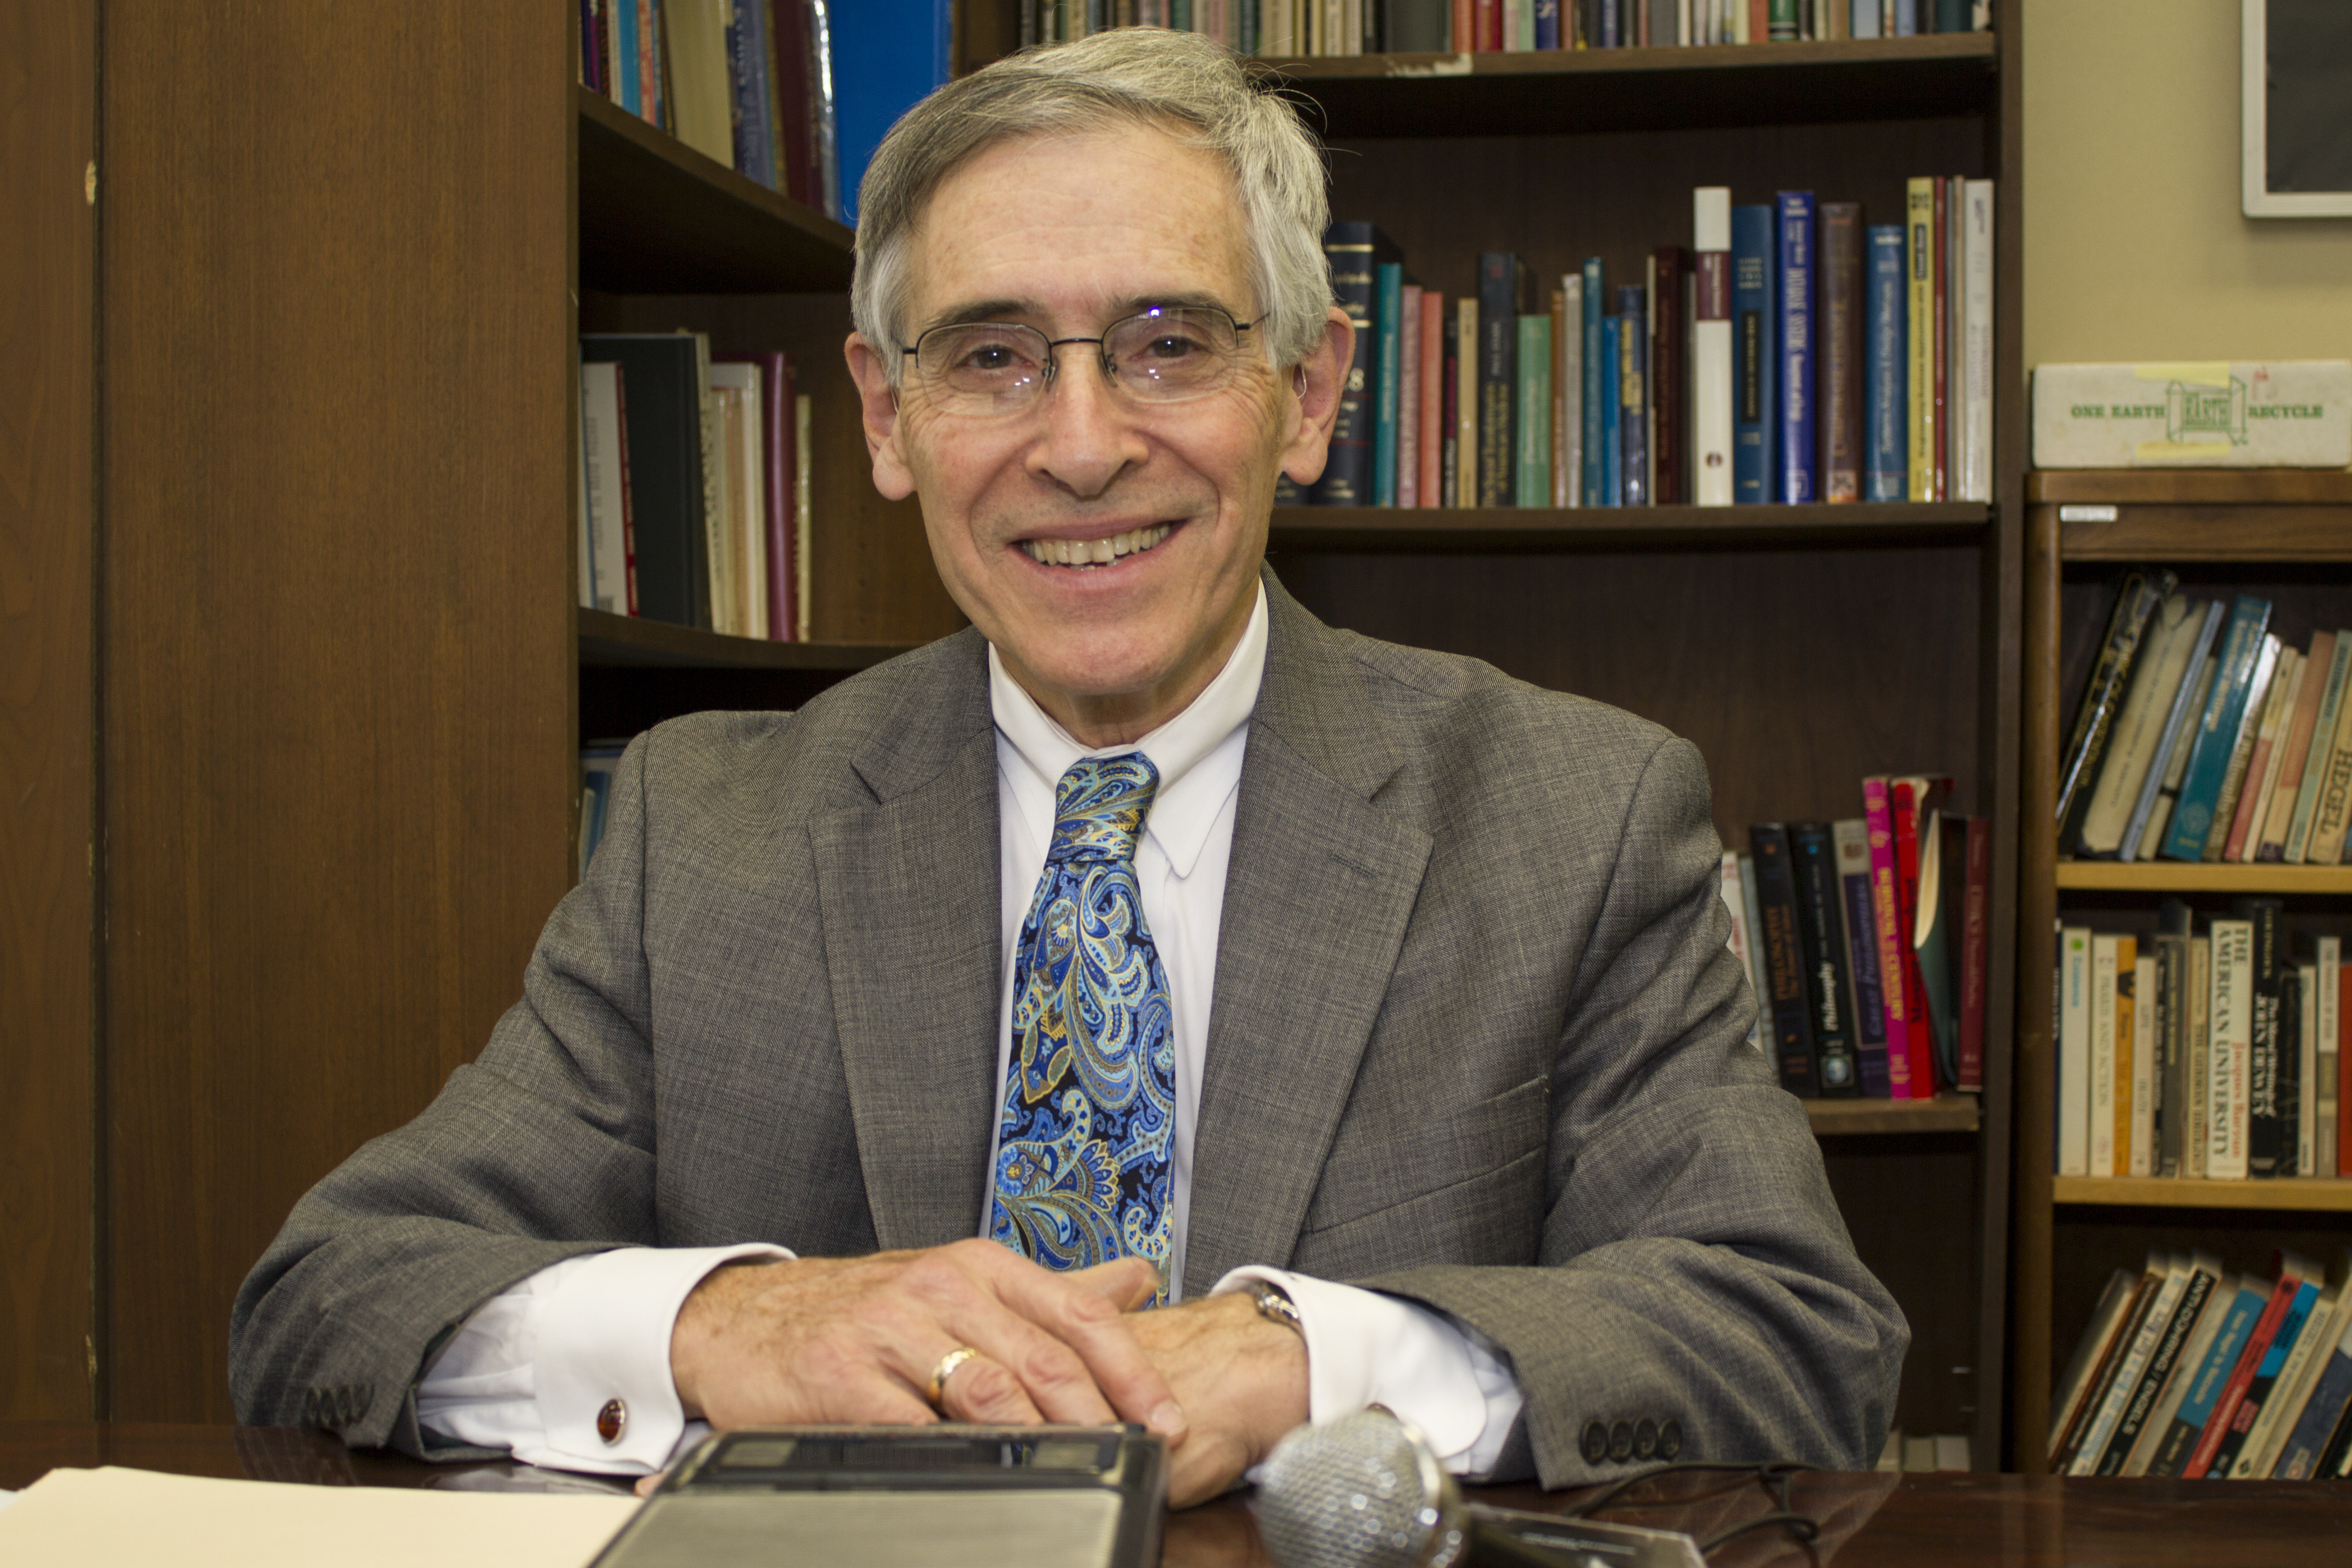 Dr. Russell Magnaghi